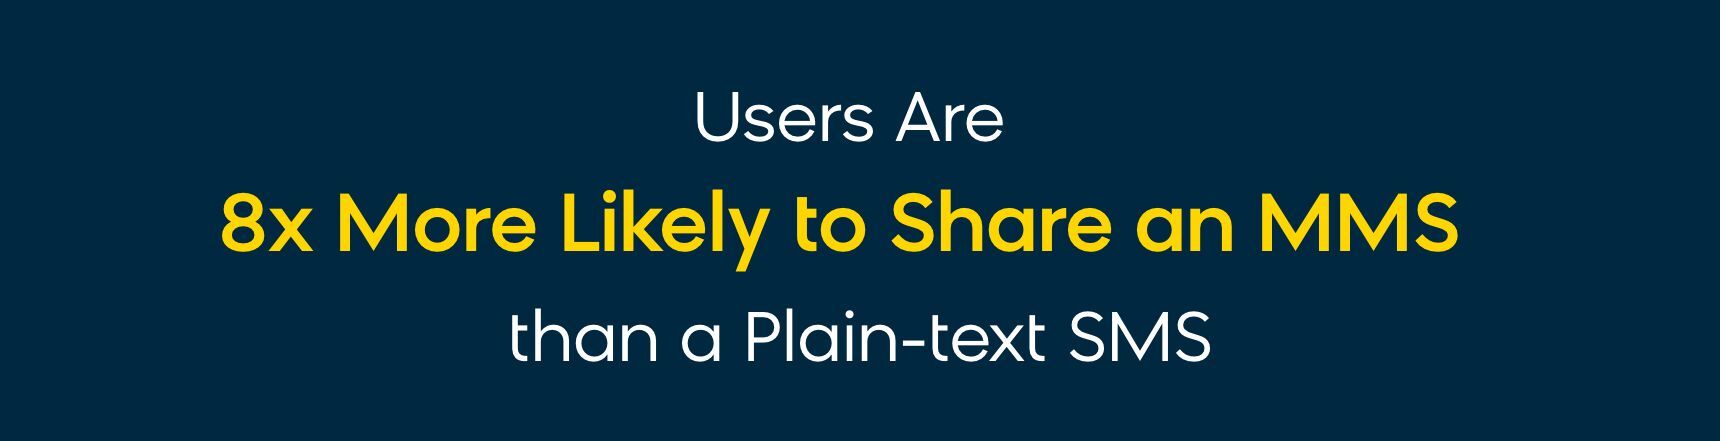 Mobile phone users are 8x more likely to share an MMS than a plain-text SMS.